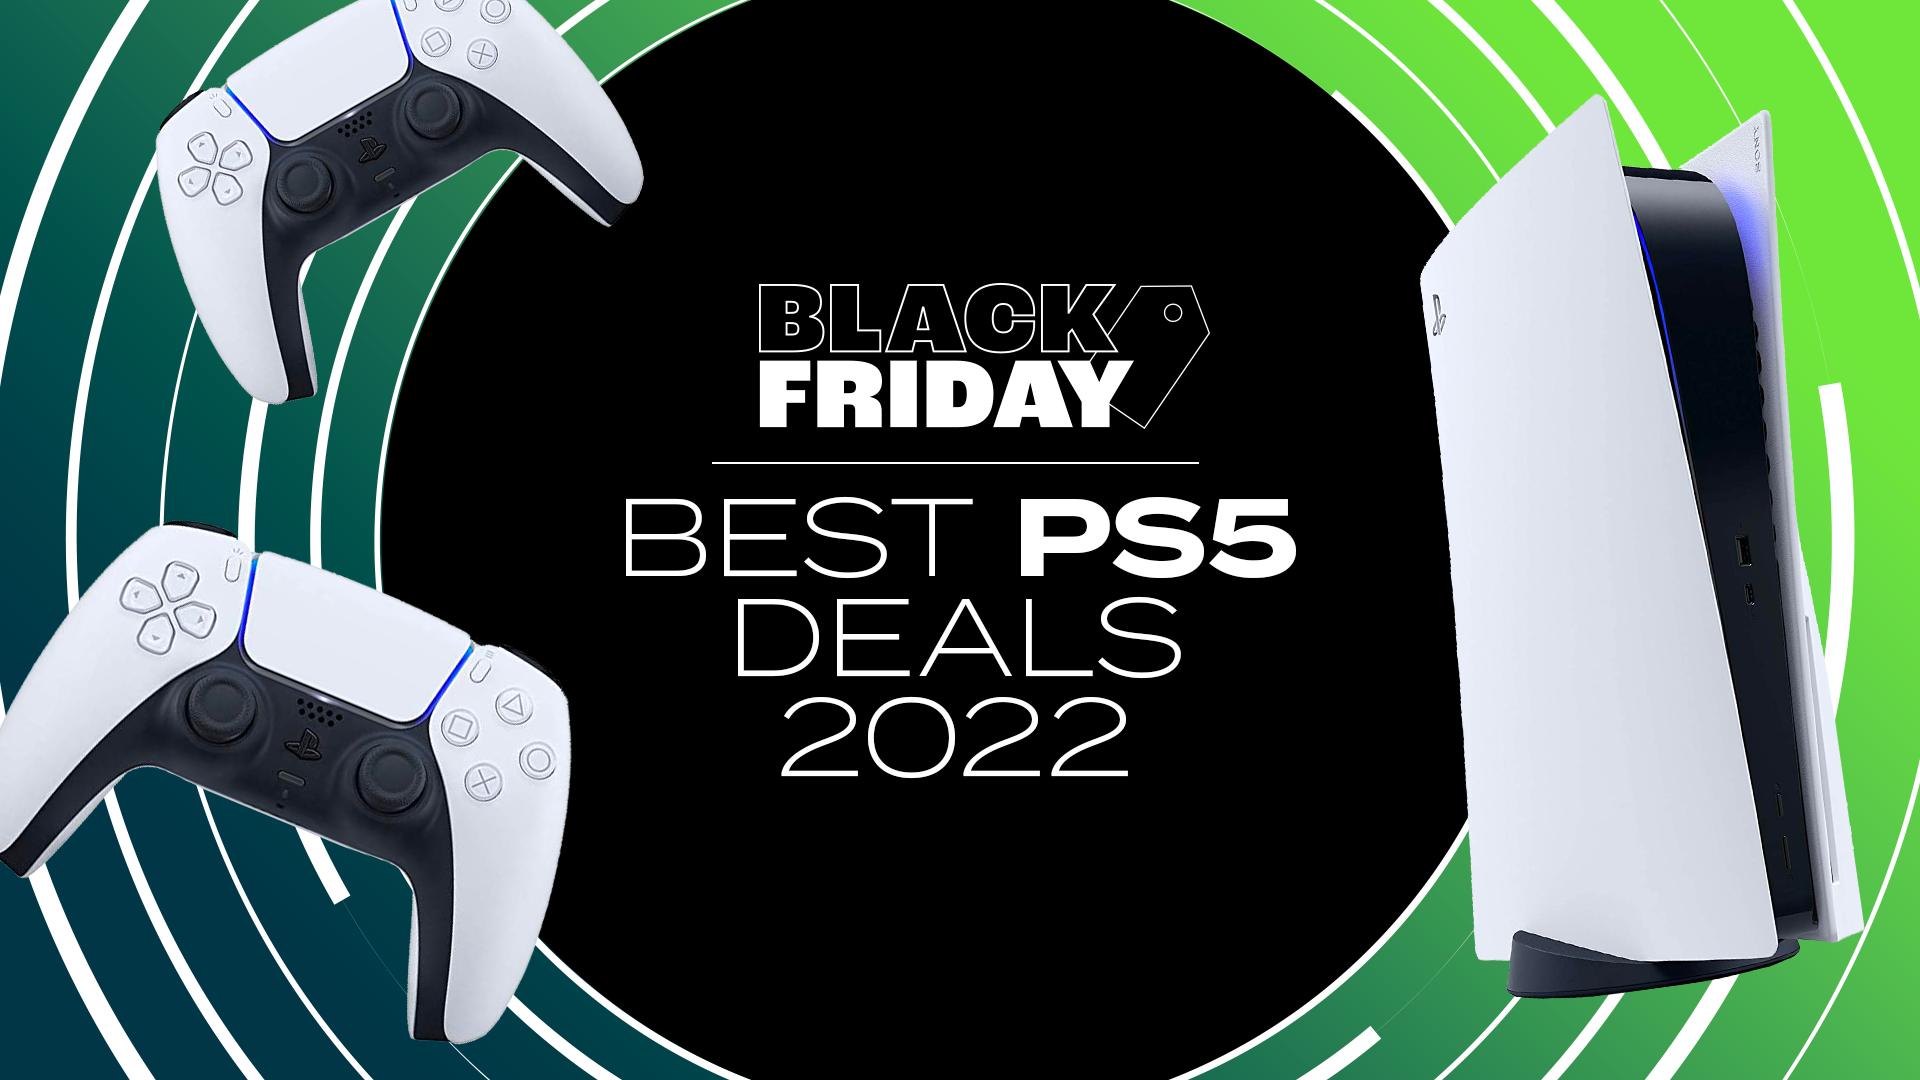 Black Friday PS5 deals 2022 best early offers and sales